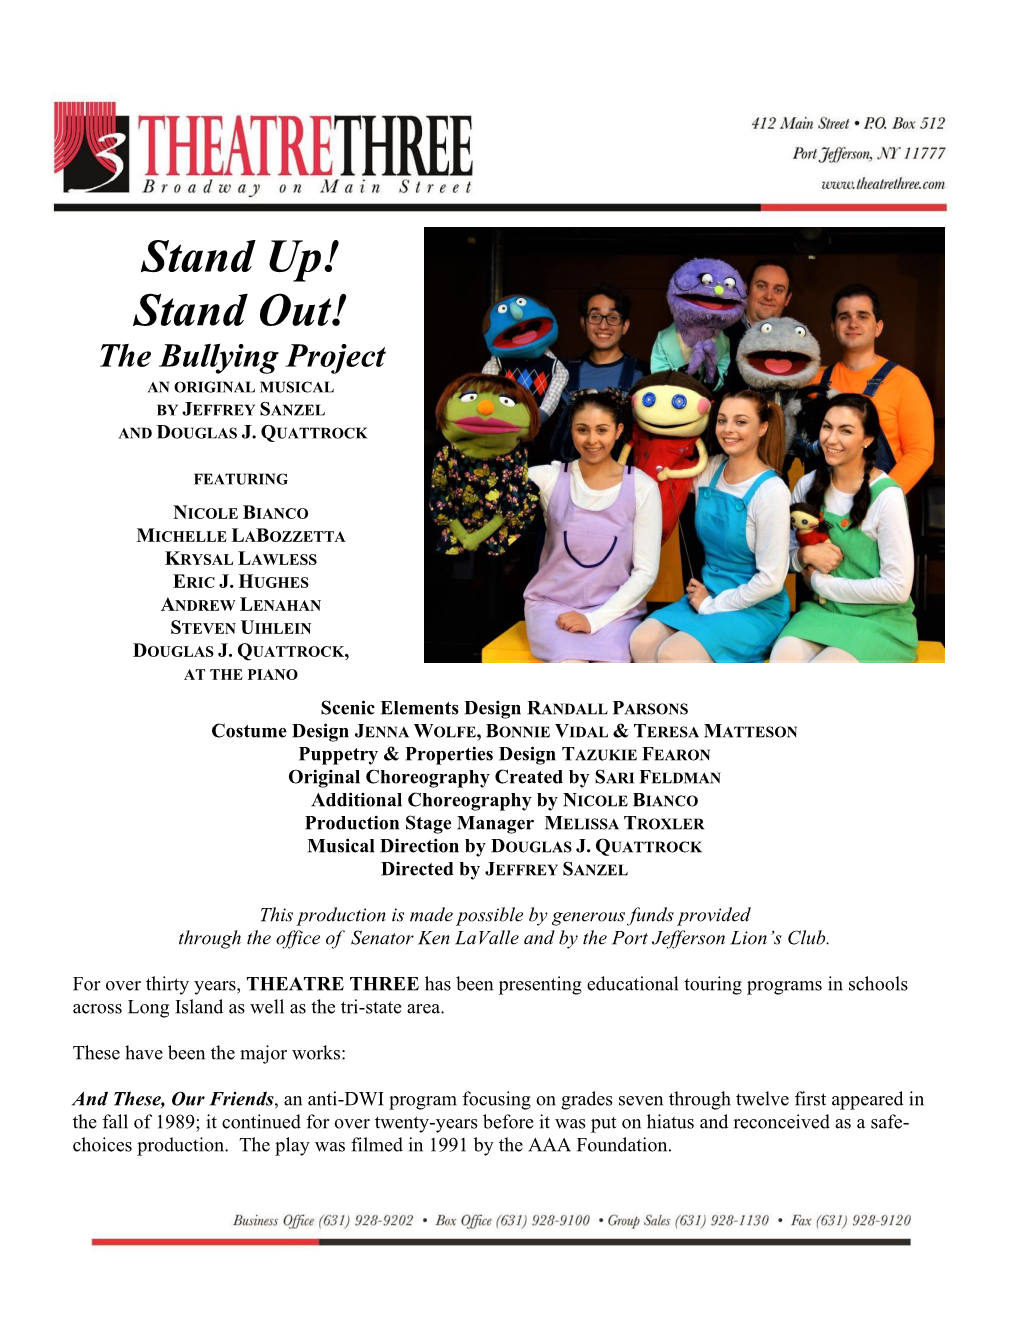 Stand Up! Stand Out! the Bullying Project an ORIGINAL MUSICAL by JEFFREY SANZEL and DOUGLAS J